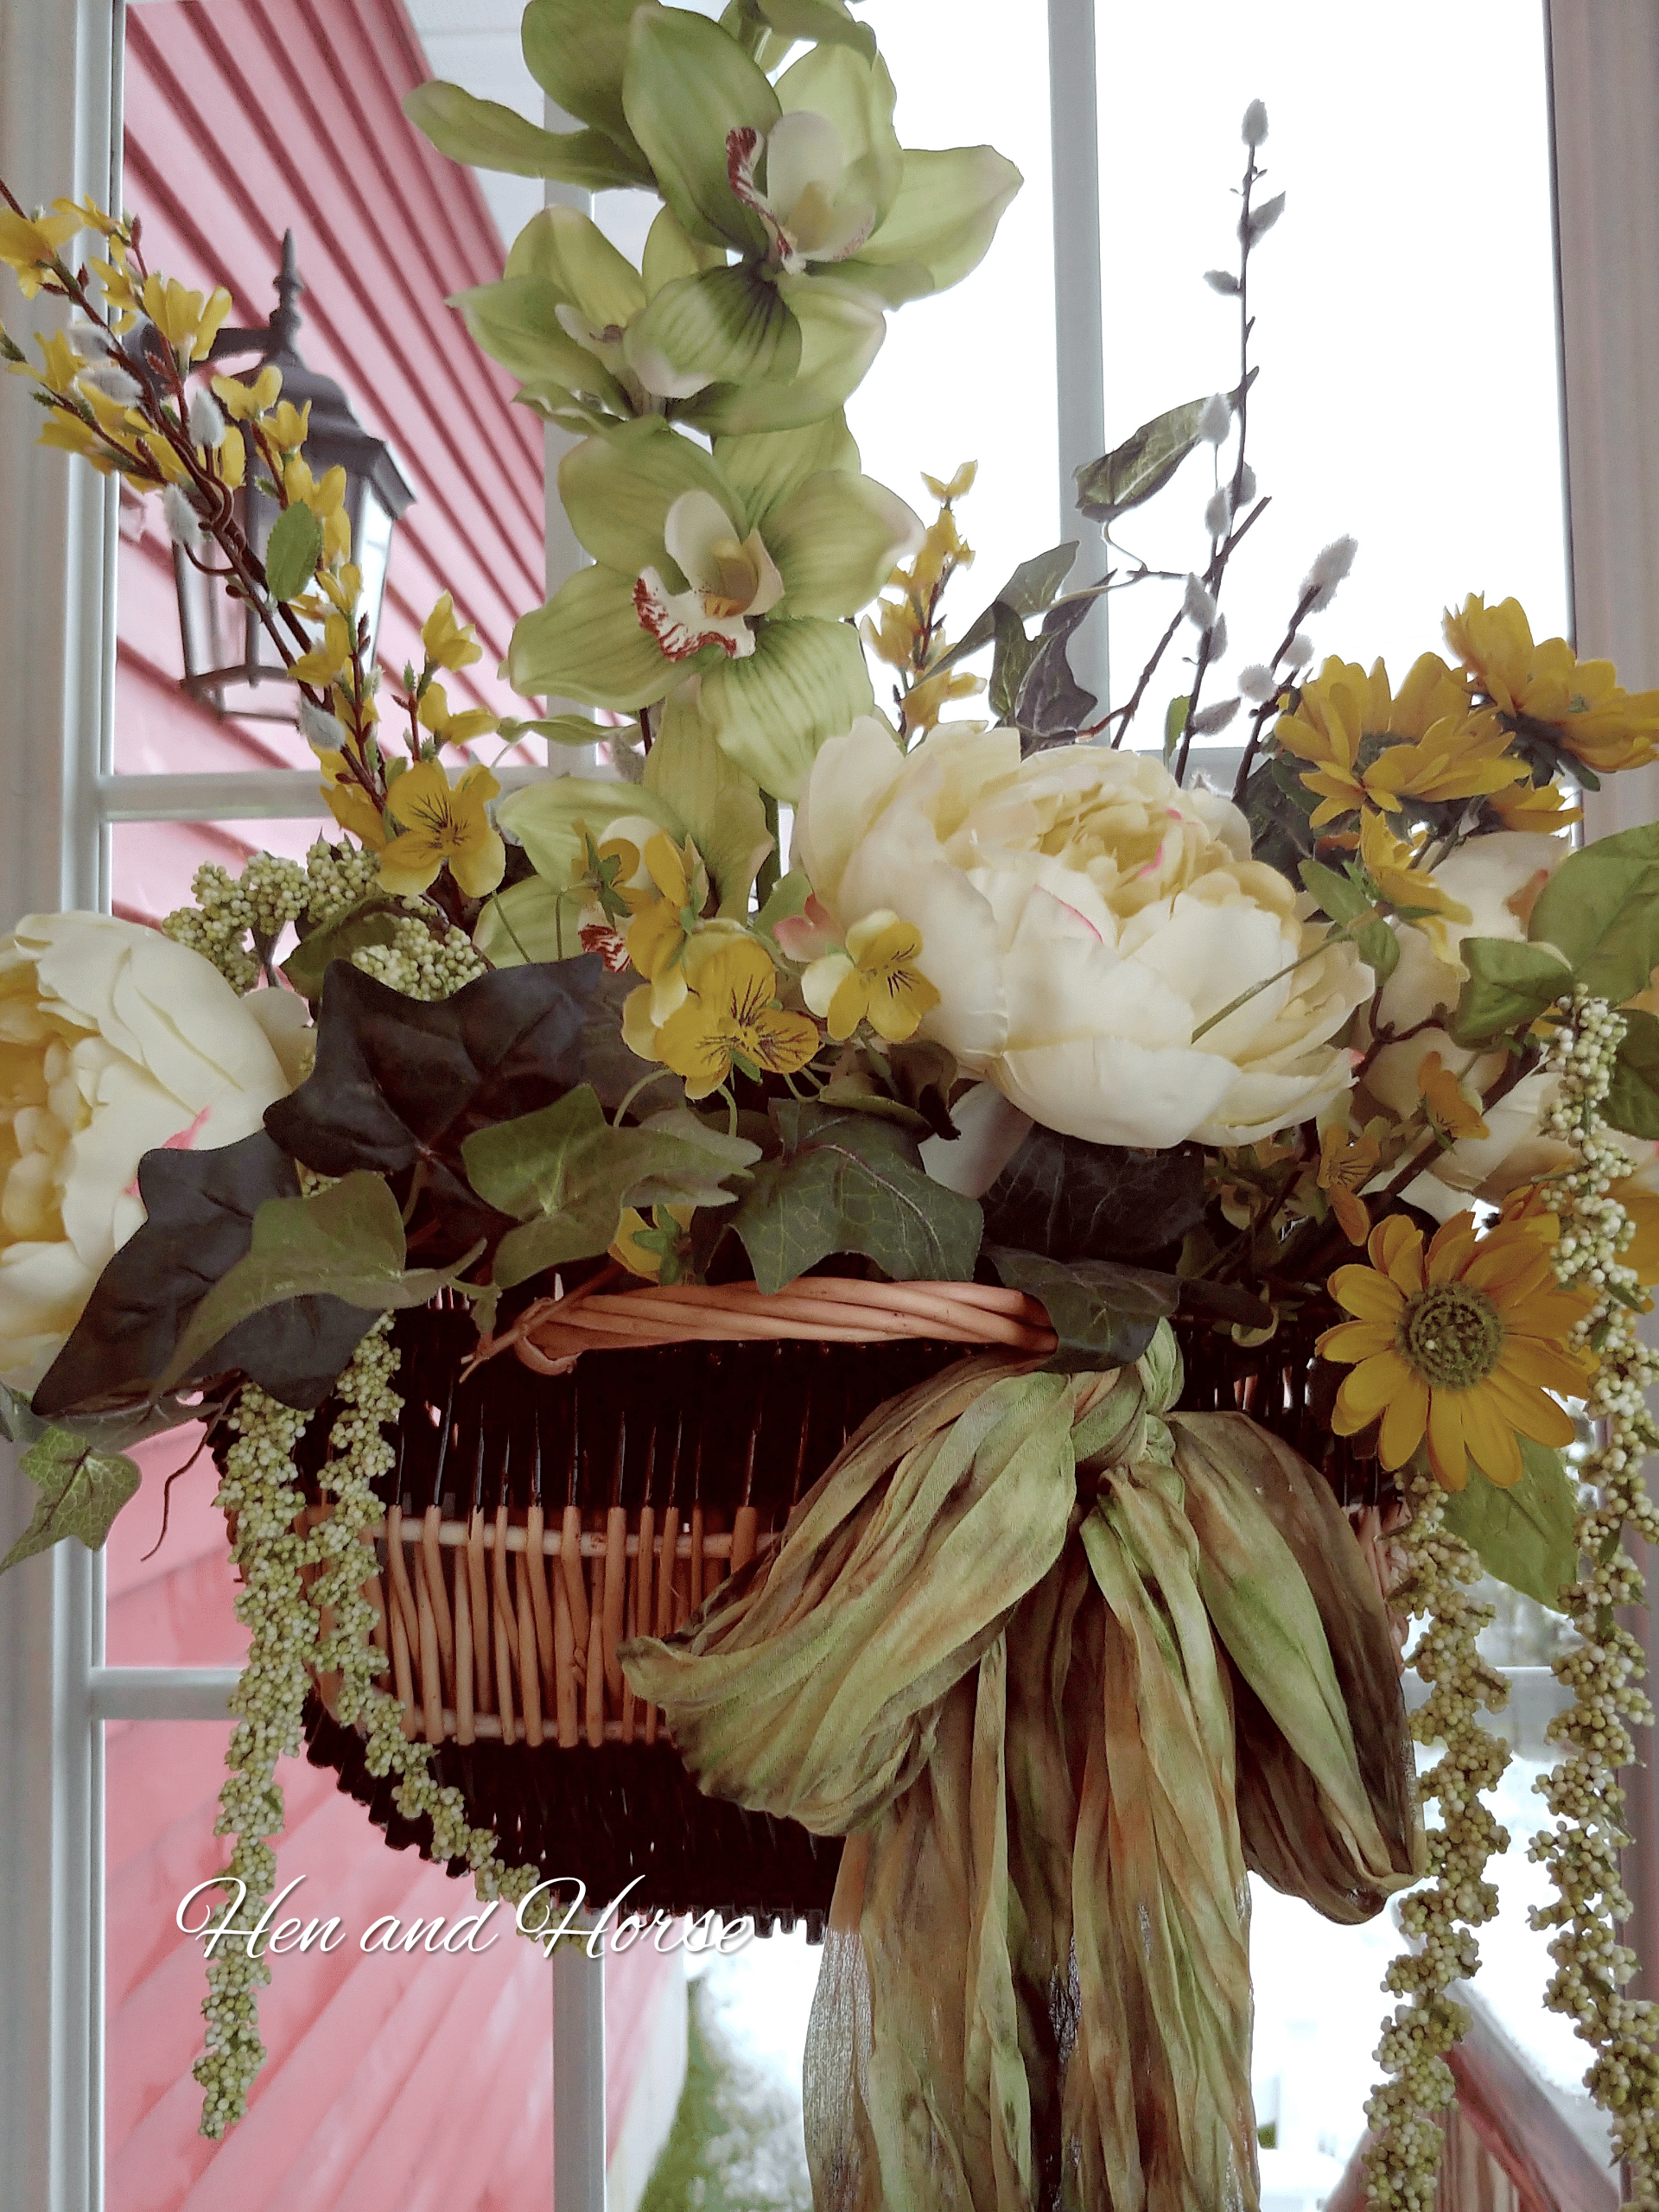 How to Freshen Up Your Front Door with a New Floral Basket Arrangement